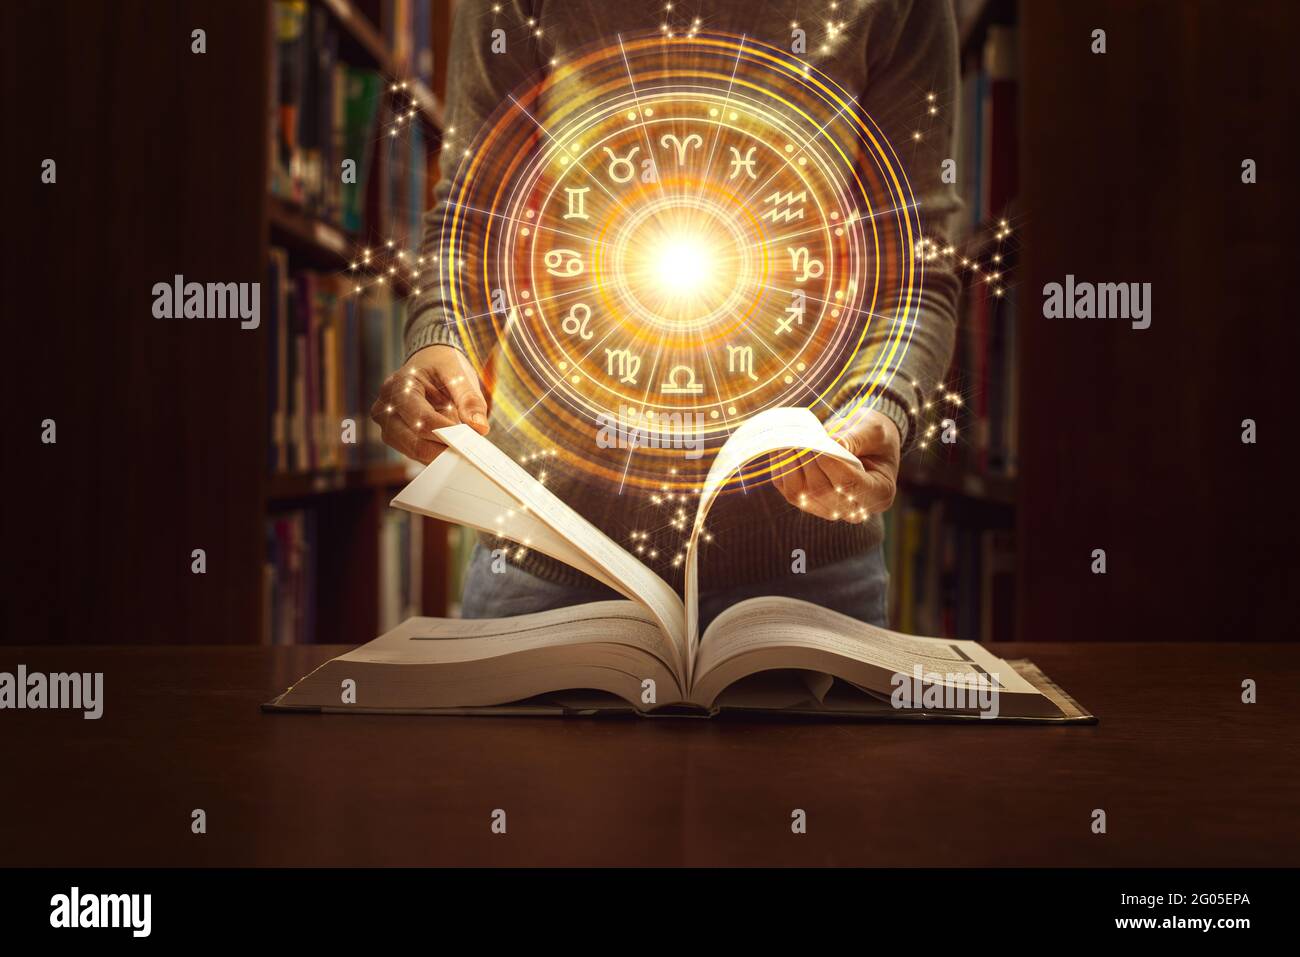 Woman reading a astrology book. Astrological wheel projection, choose a zodiac sign. Trust horoscope future predictions, consulting stars. Power of un Stock Photo